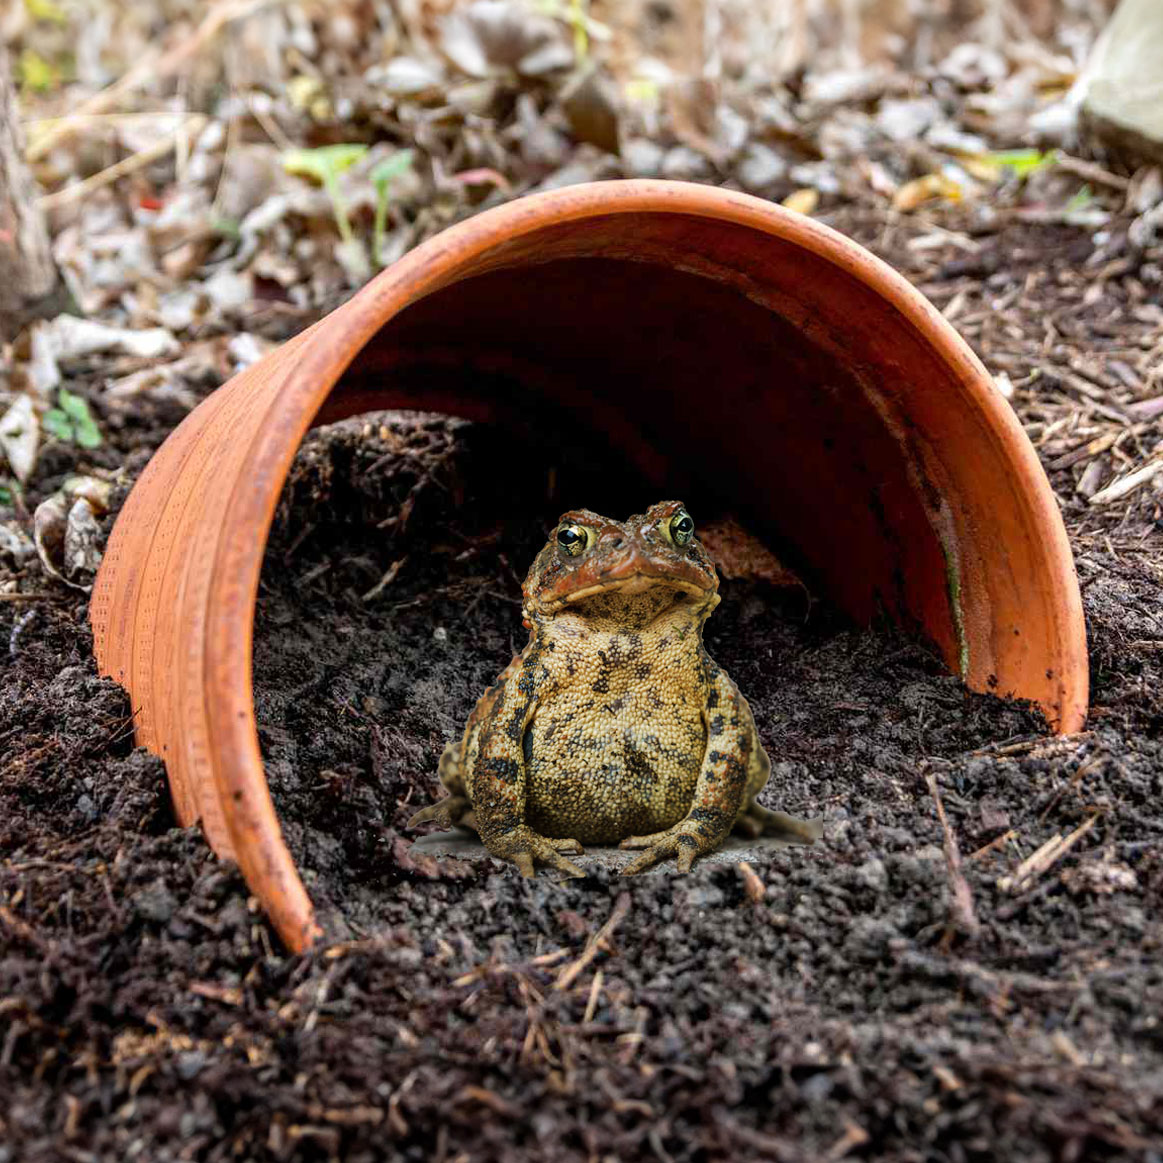 American toad sits inside of an overturned terra cotta pot in the mulch.